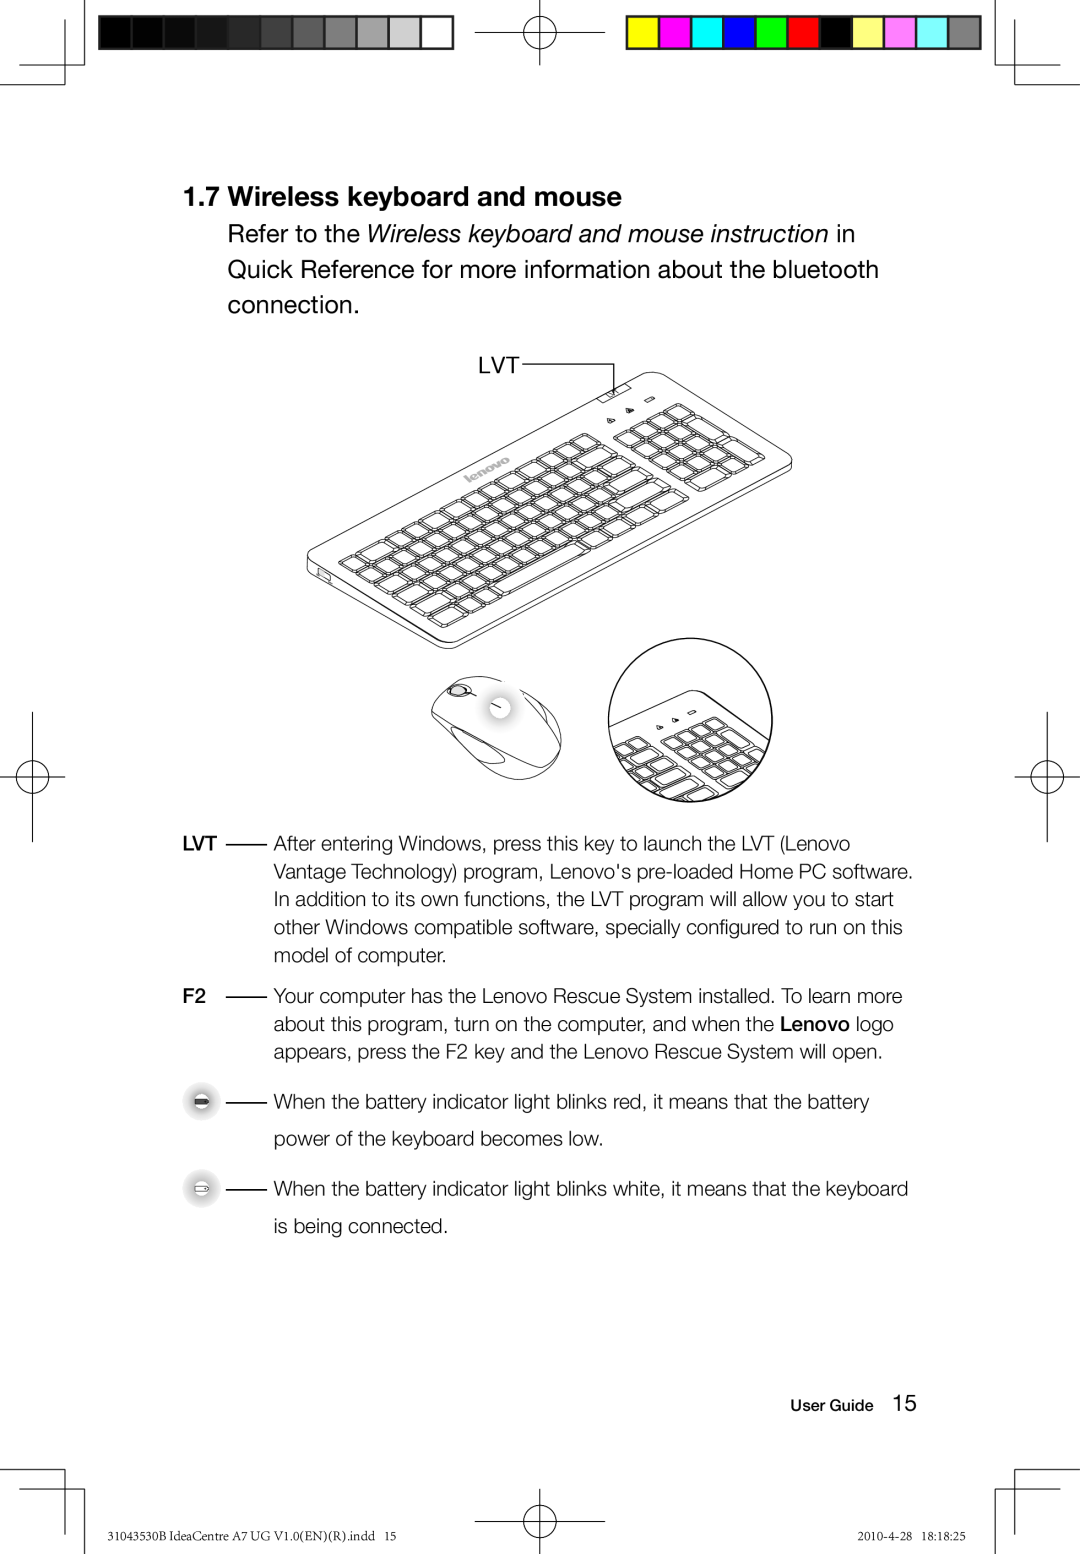 Lenovo A7 manual Wireless keyboard and mouse 